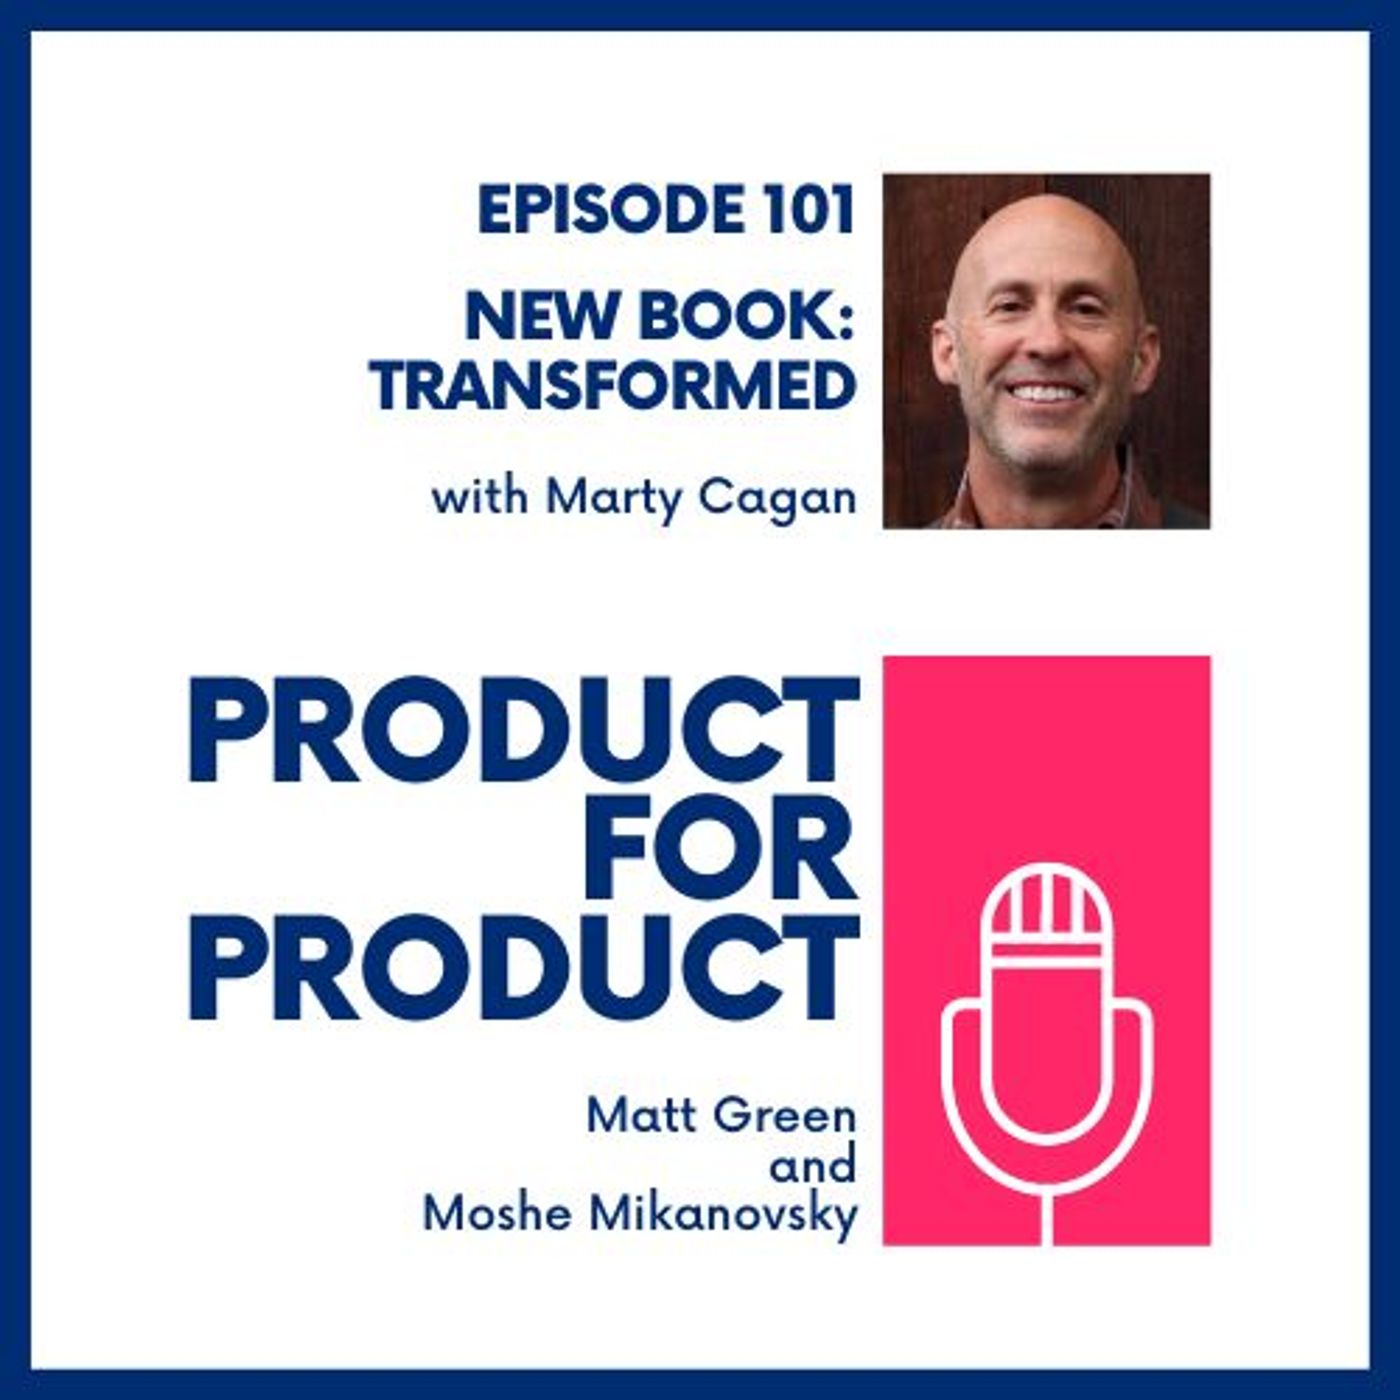 EP 101 - Transformed with Marty Cagan